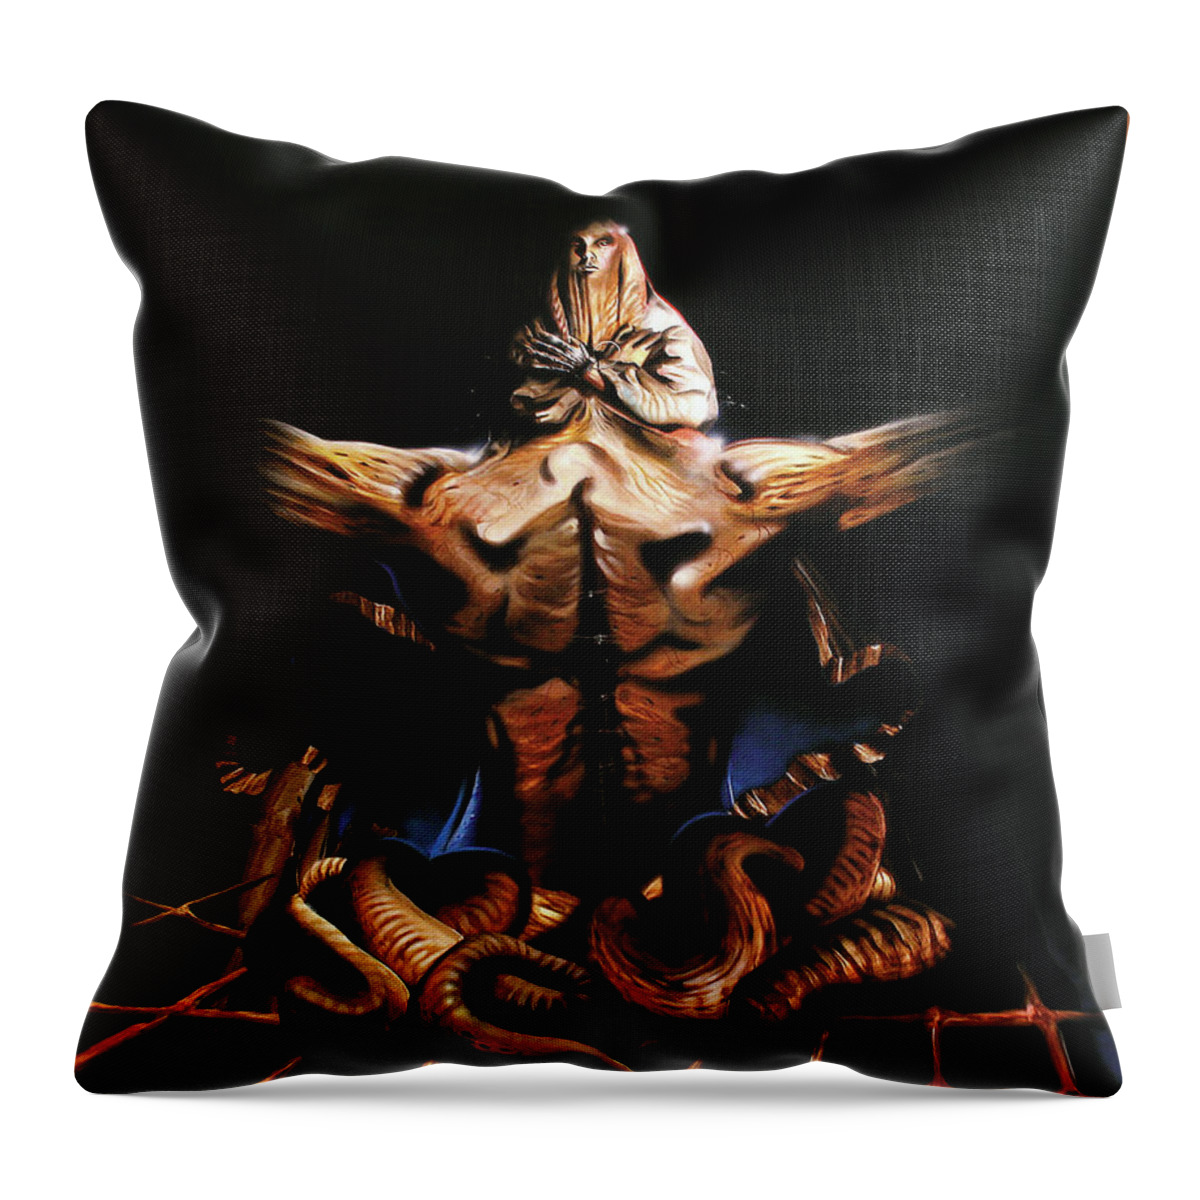 Fantasy Throw Pillow featuring the painting Obliveon Nemesis by Sv Bell